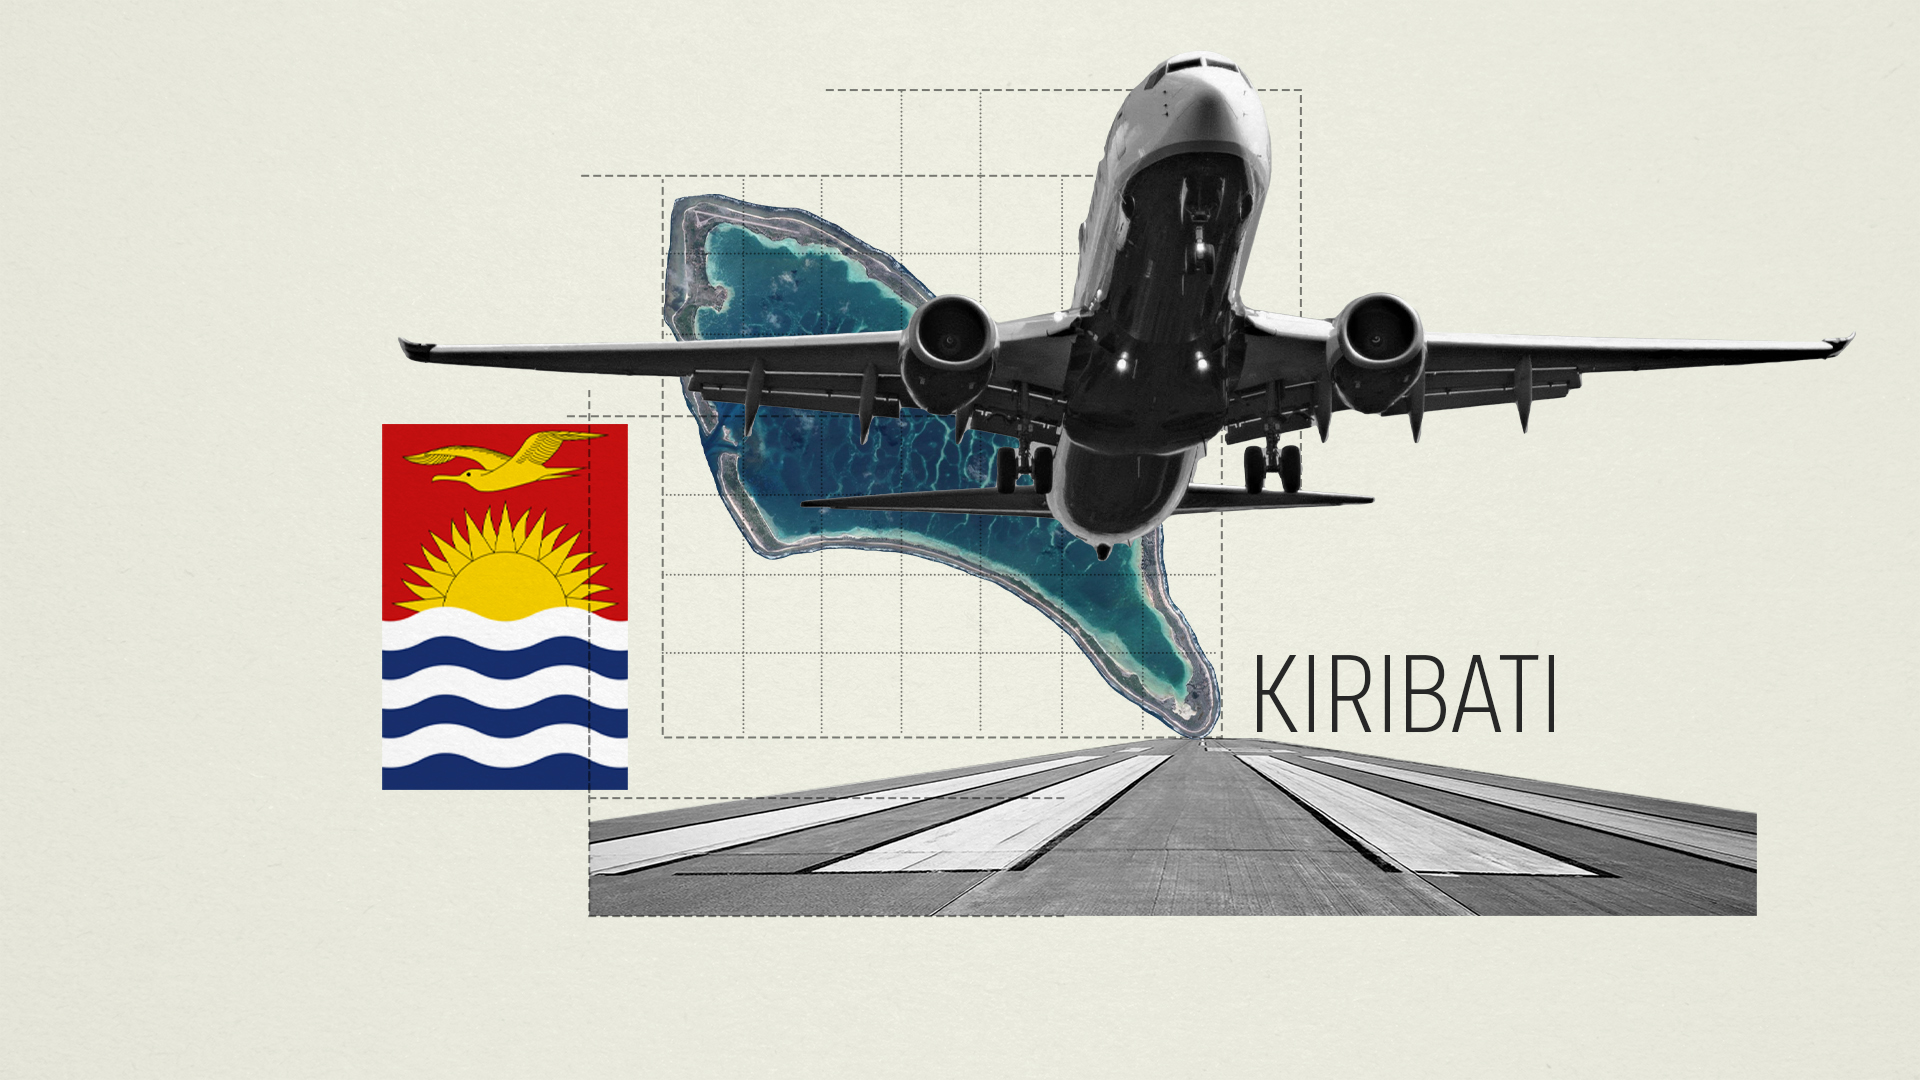 A plane taking off on with an aerial view of Kanton island and an image of Kiribati's flag in the background.